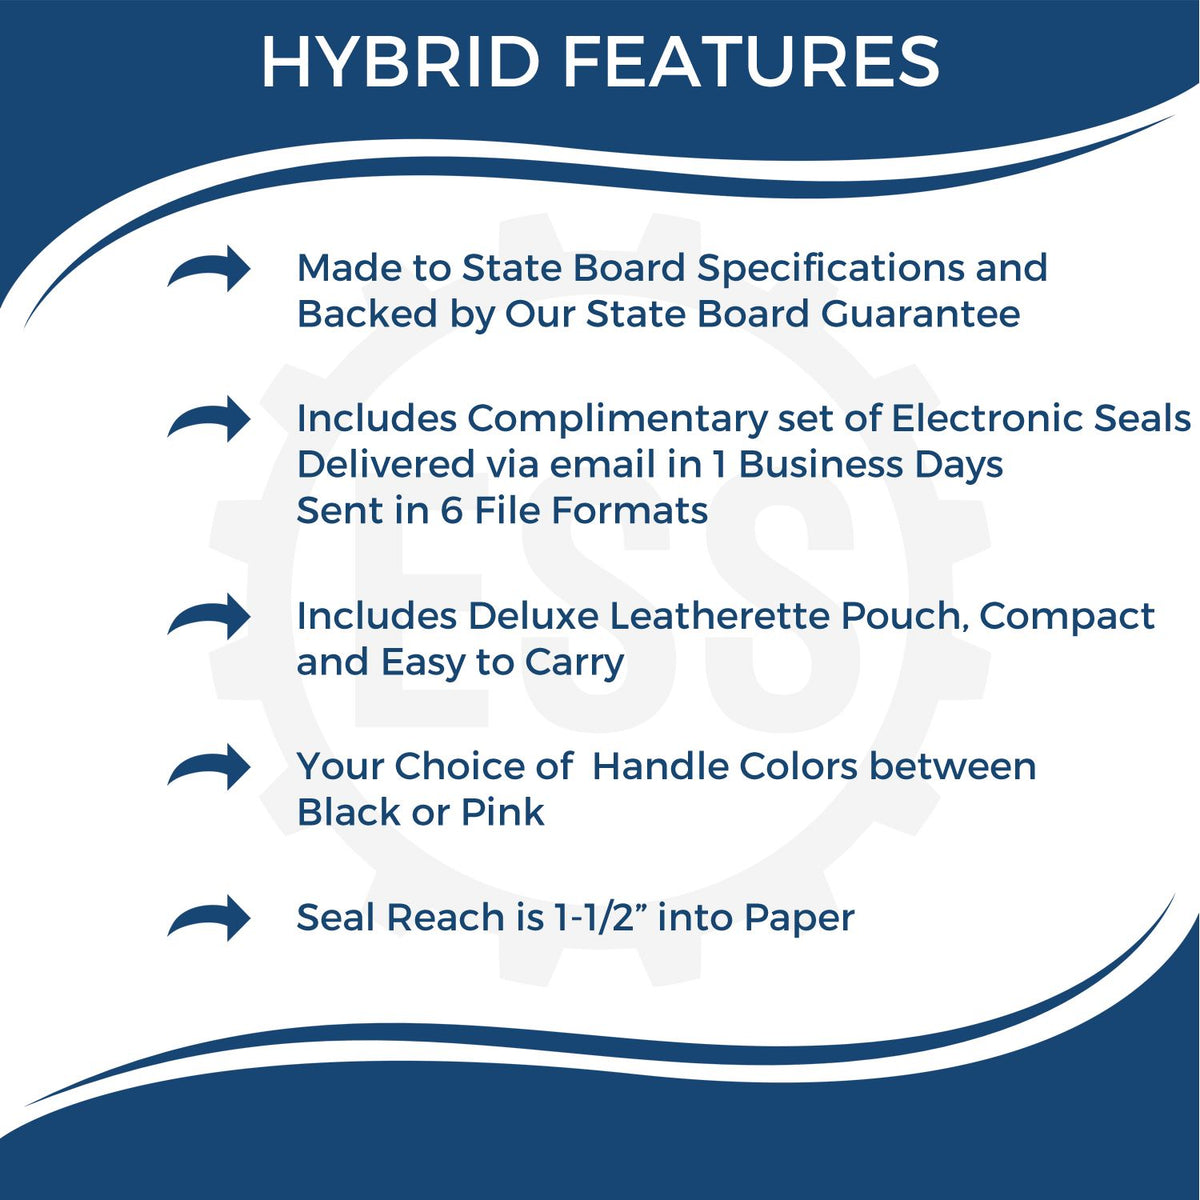 A picture of an infographic highlighting the selling points for the Hybrid Tennessee Architect Seal